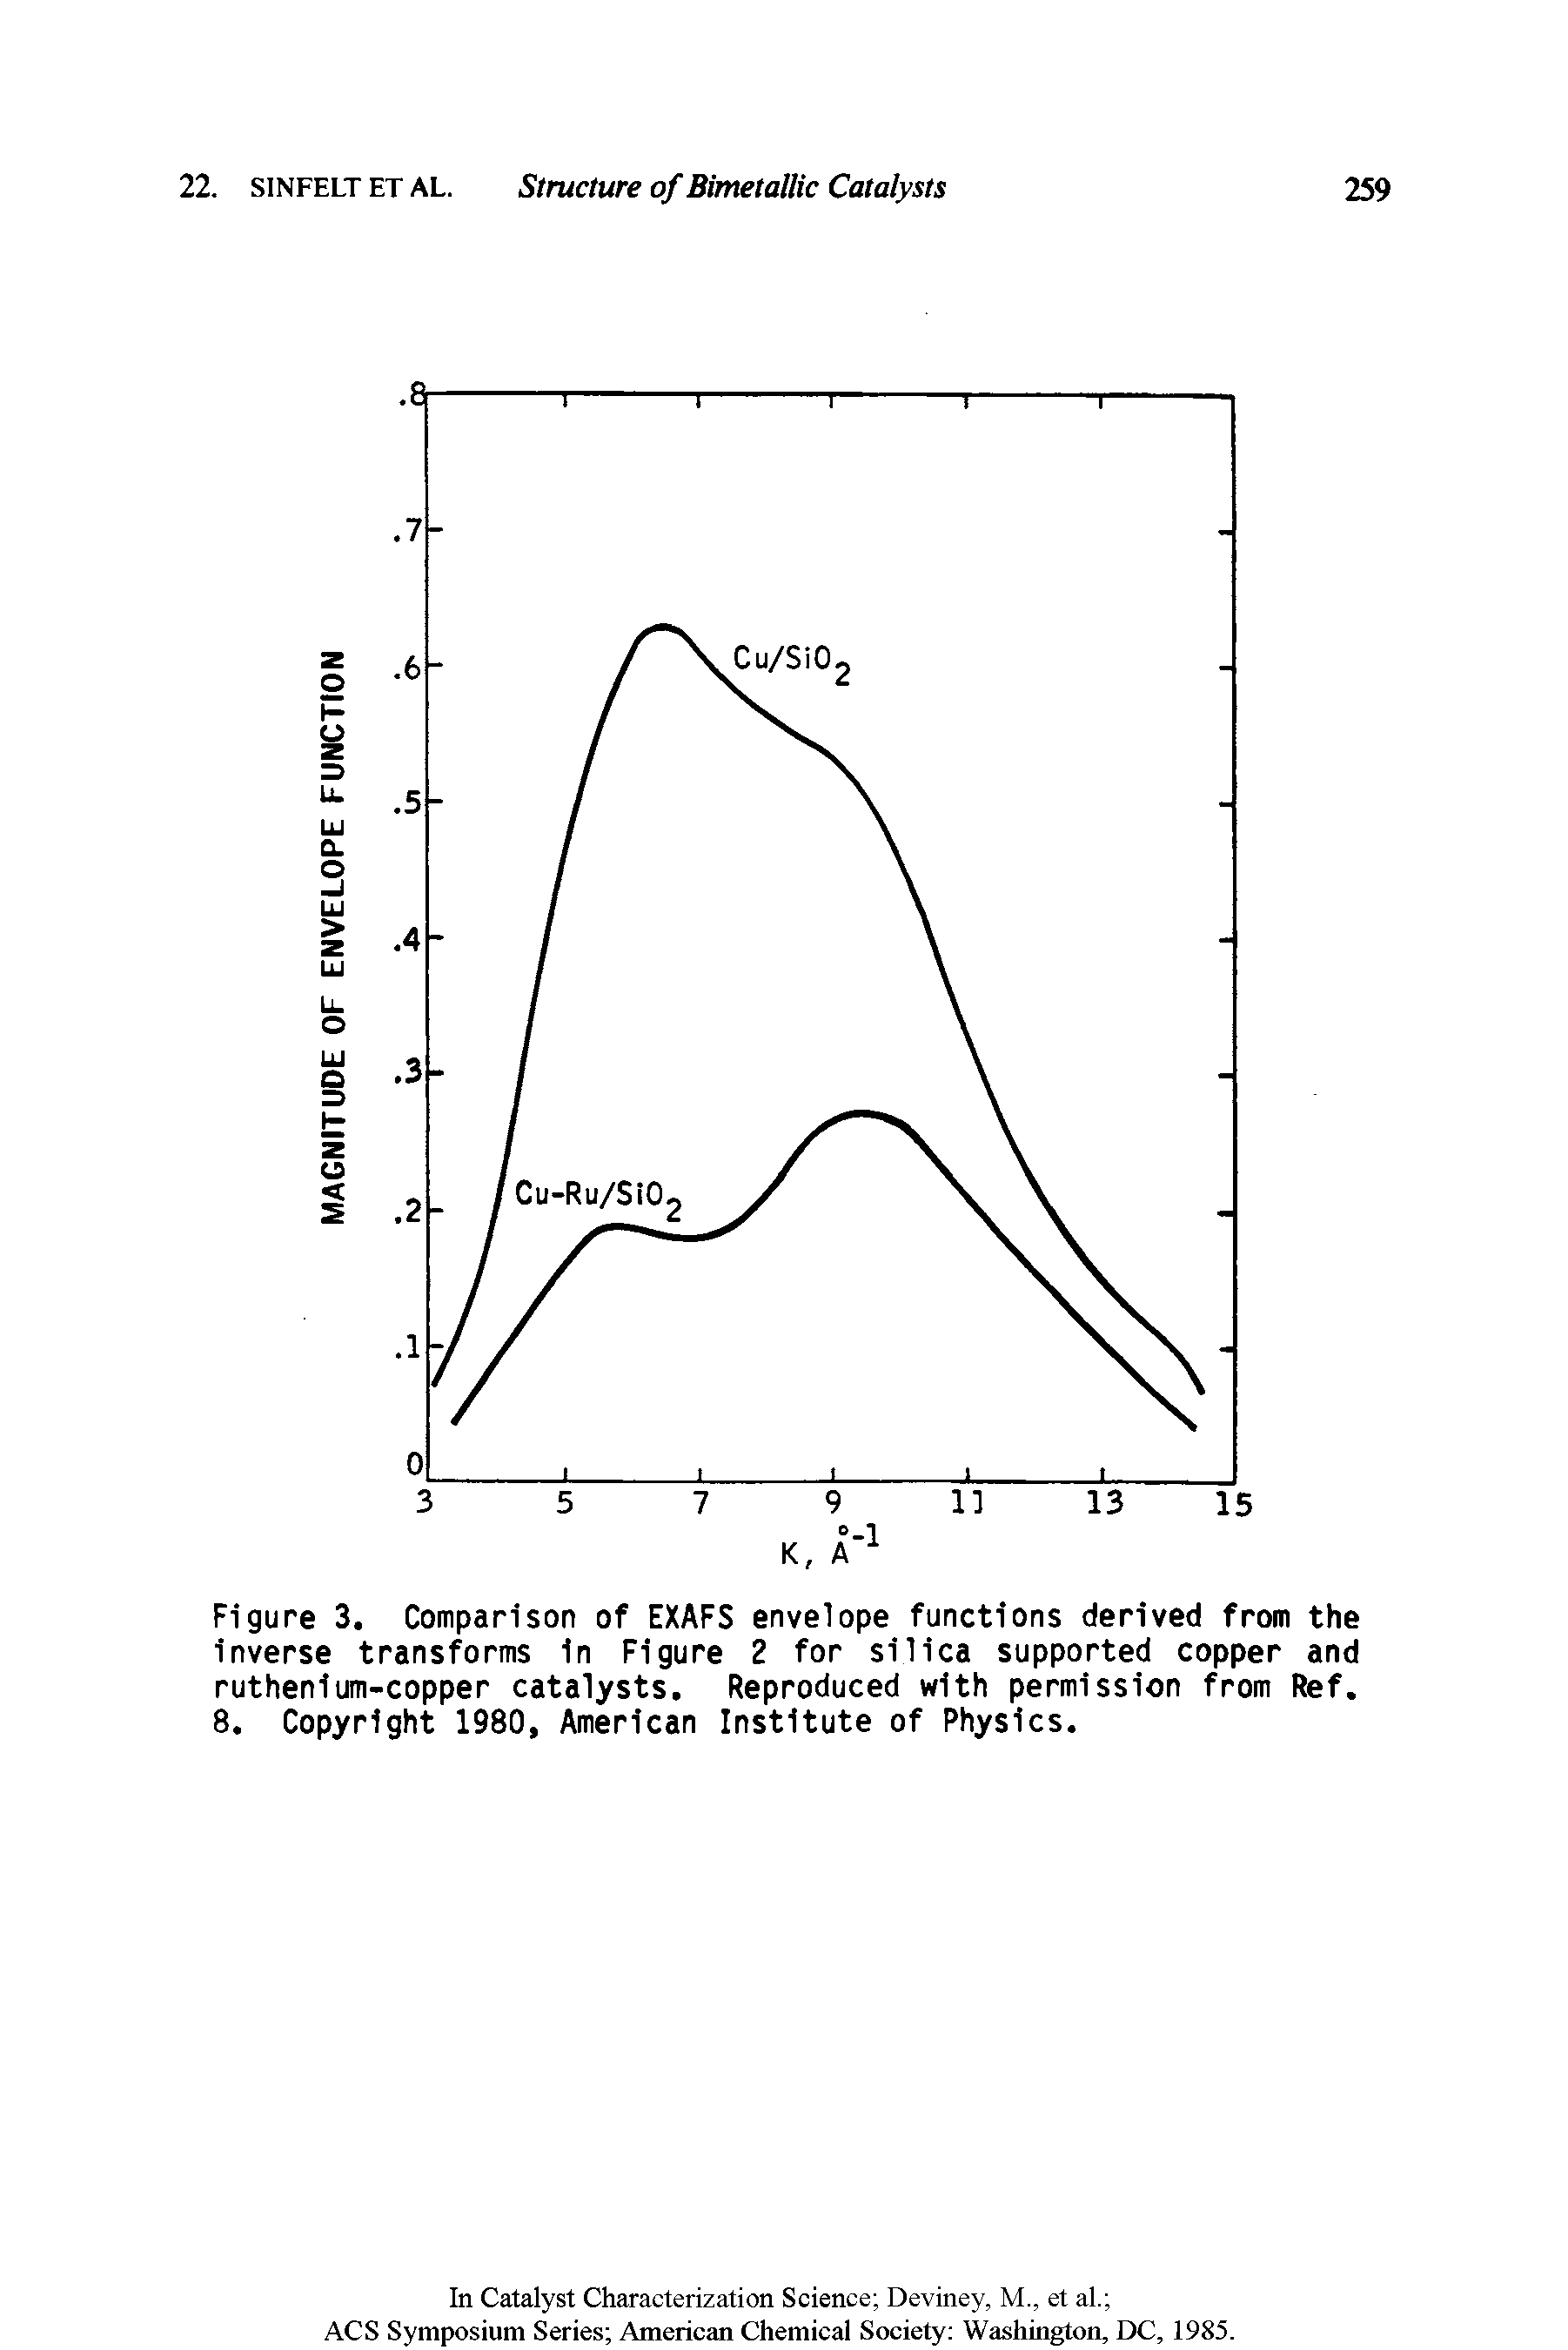 Figure 3. Comparison of EXAFS envelope functions derived from the inverse transforms in Figure 2 for silica supported copper and ruthenium-copper catalysts. Reproduced with permission from Ref. 8. Copyright 1980, American Institute of Physics.